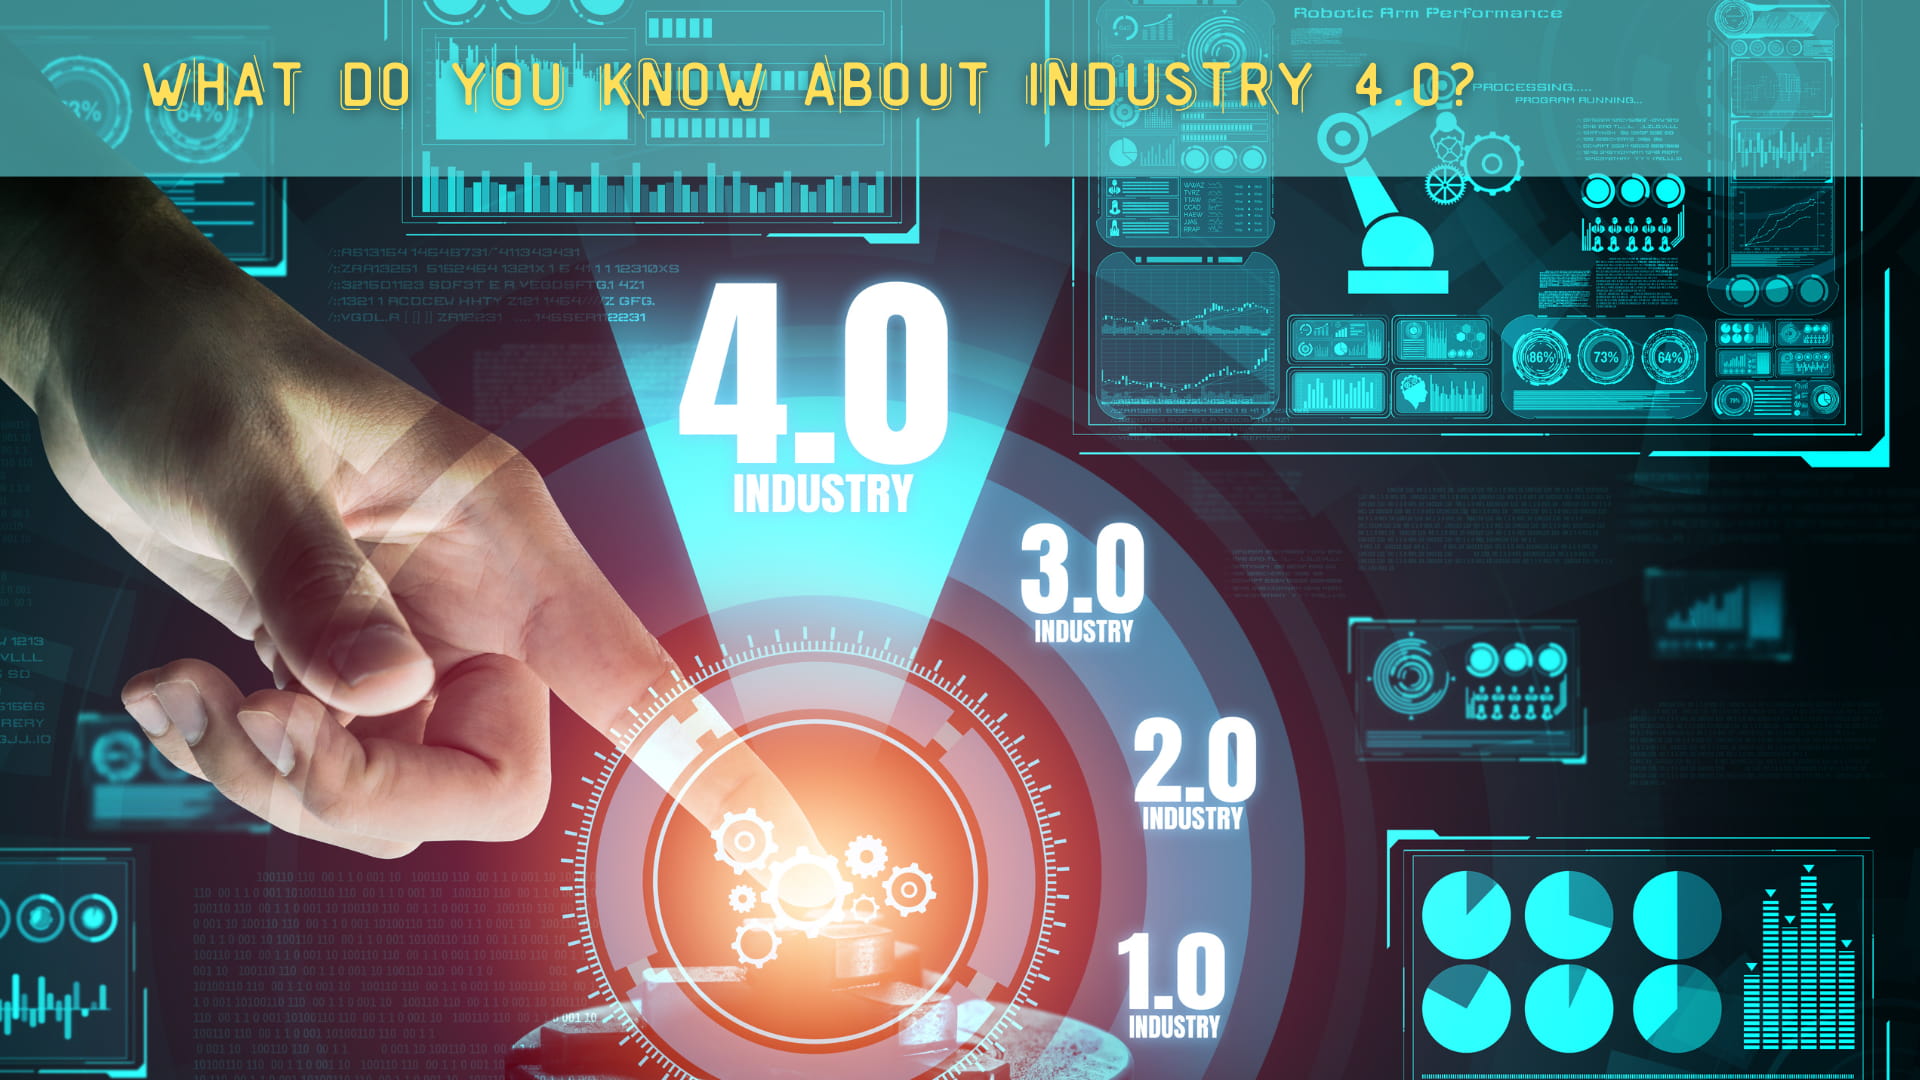 What is Industry 4.0? How did it come about and how does it impact the labor market?